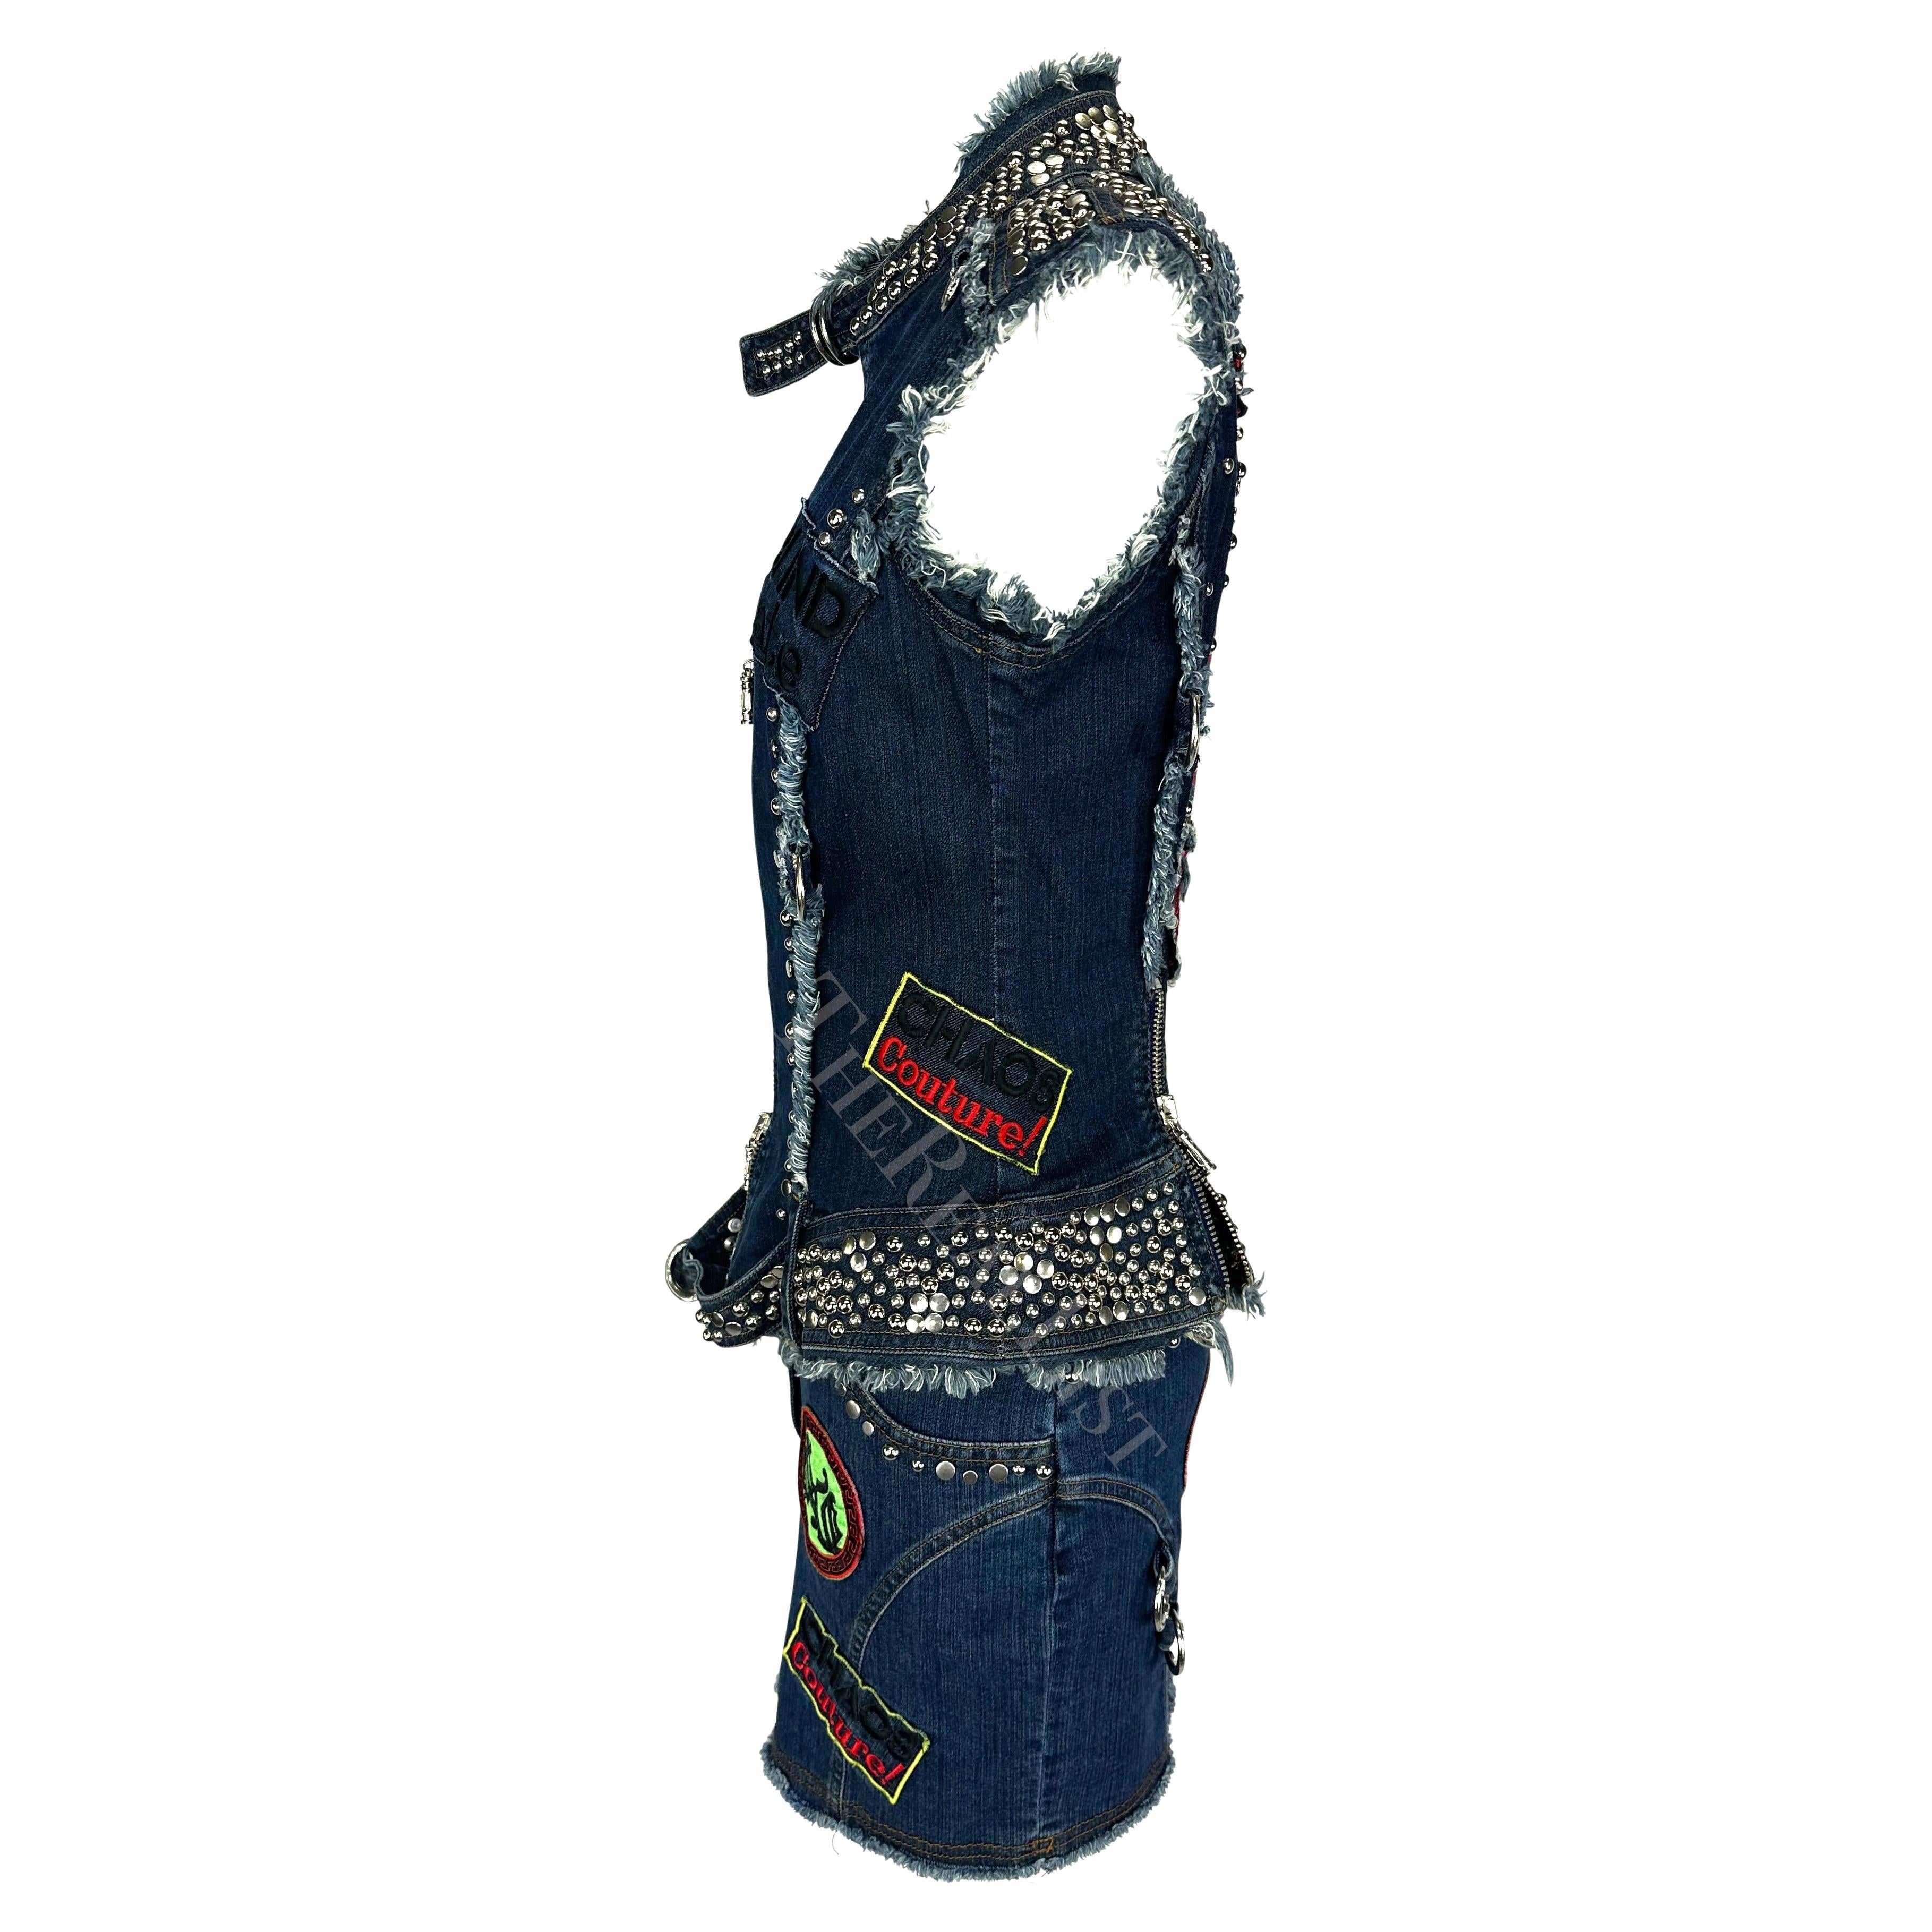 S/S 2005 Versace by Donatella Chaos Couture Studded Denim Patch Vest Skirt Set For Sale 4